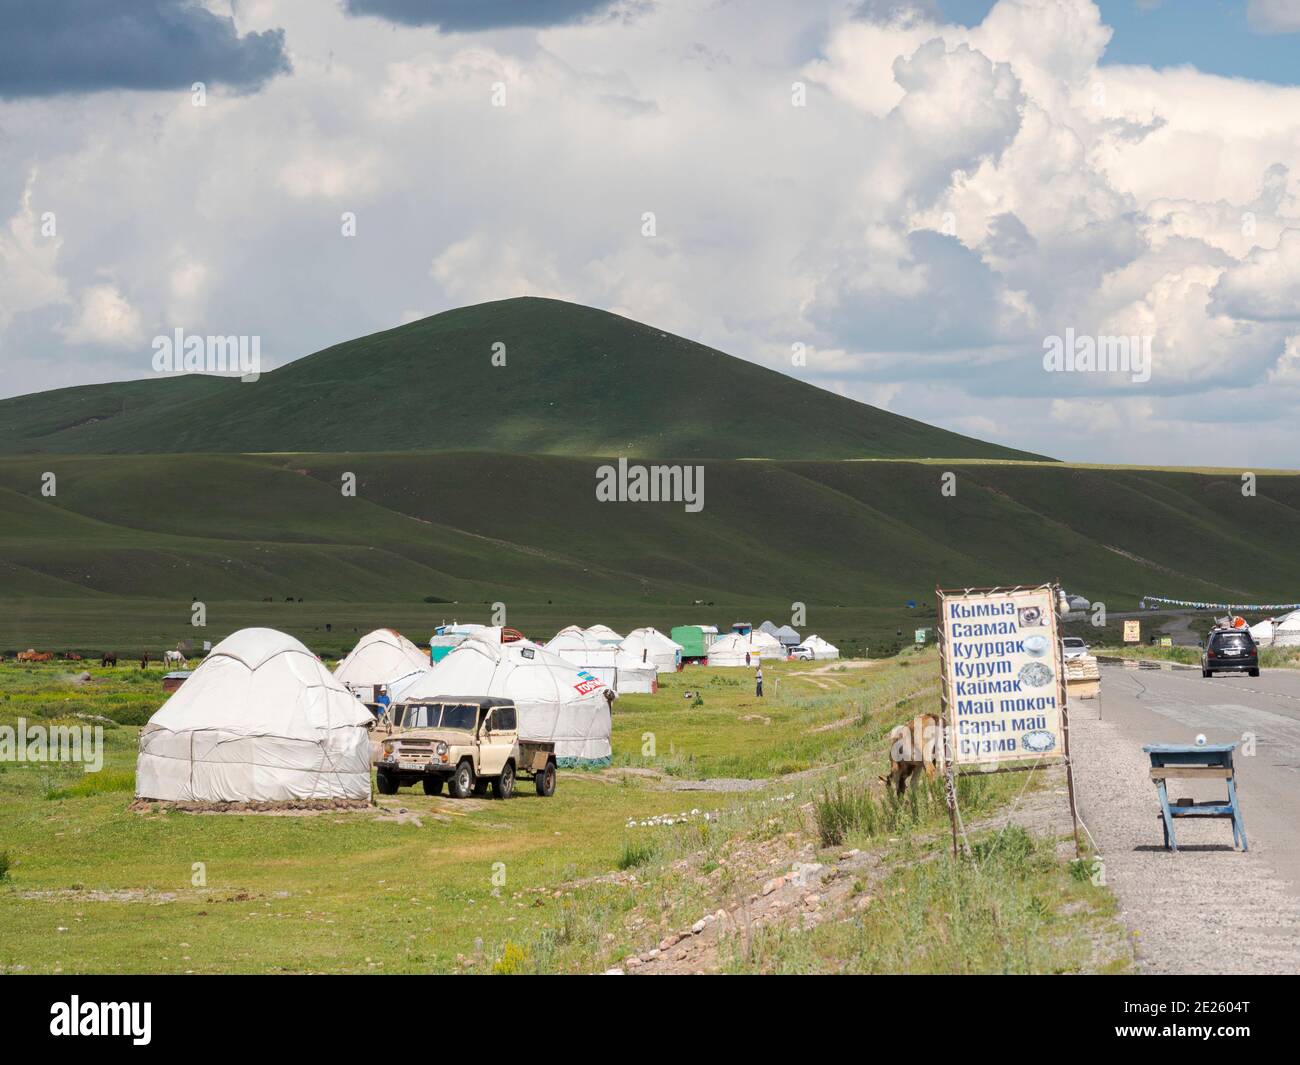 Jurts on summer pasture near Tien Shan Highway. The Suusamyr plain, a high valley in Tien Shan Mountains.  Asia, central Asia, Kyrgyzstan Stock Photo